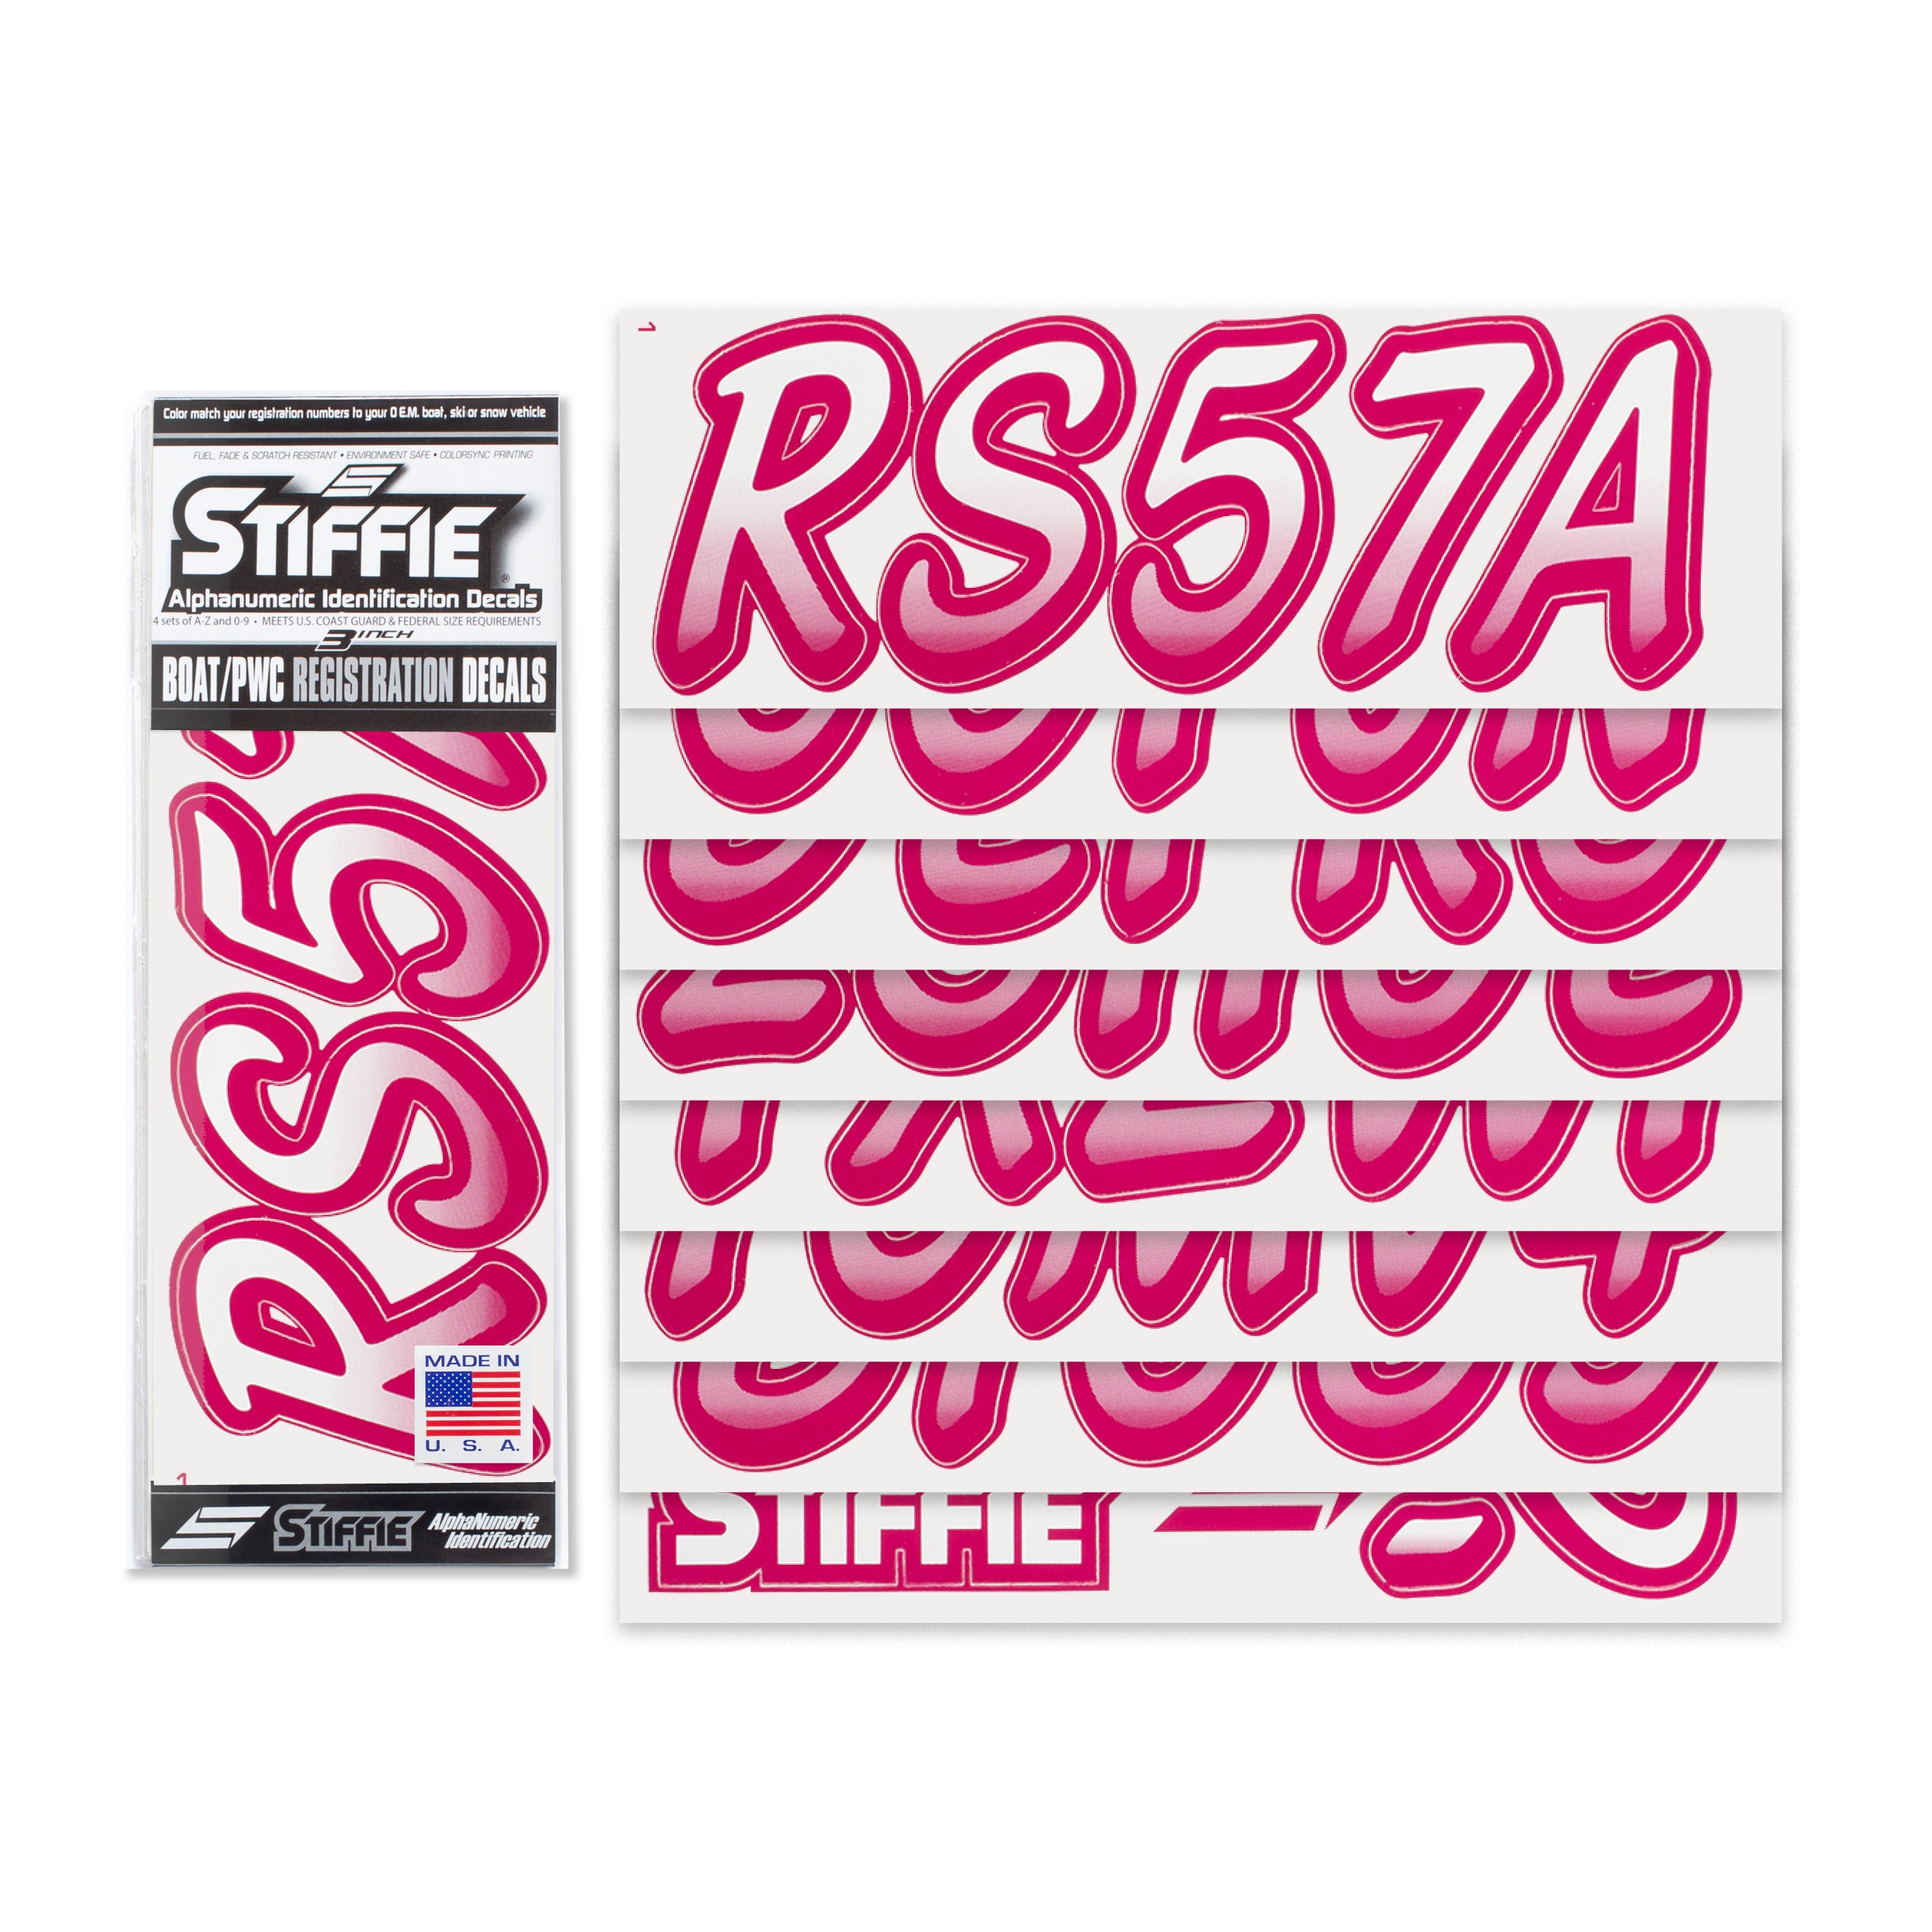 STIFFIE Whipline White/Berry 3" Alpha-Numeric Registration Identification Numbers Stickers Decals for Boats & Personal Watercraft